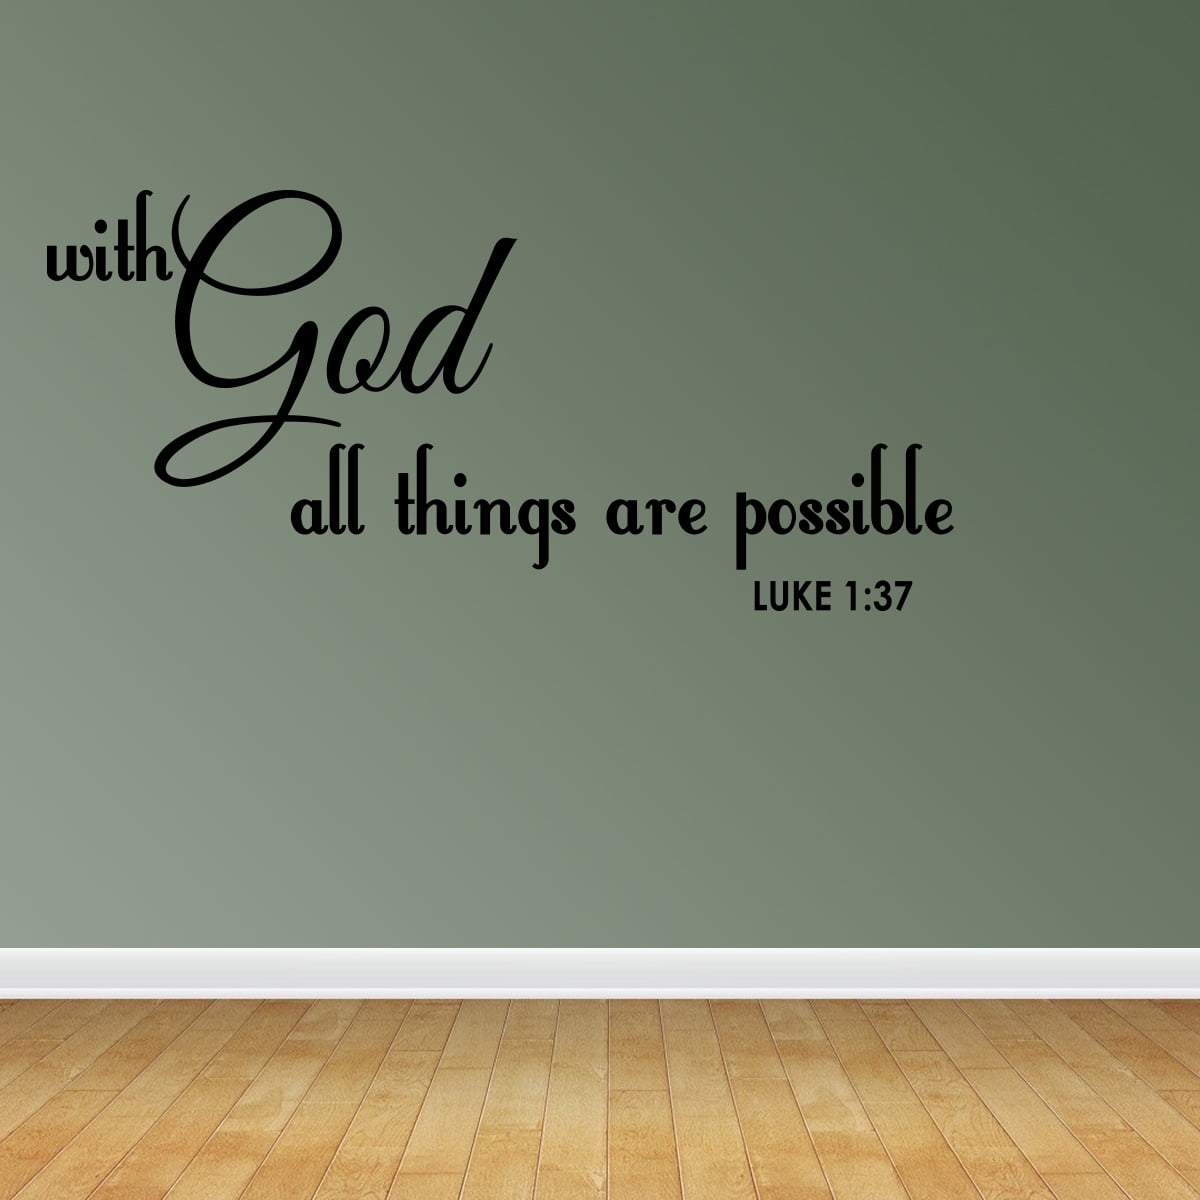 ThatLilCabin With God All Things Are Possible AS531 8" sticker decal